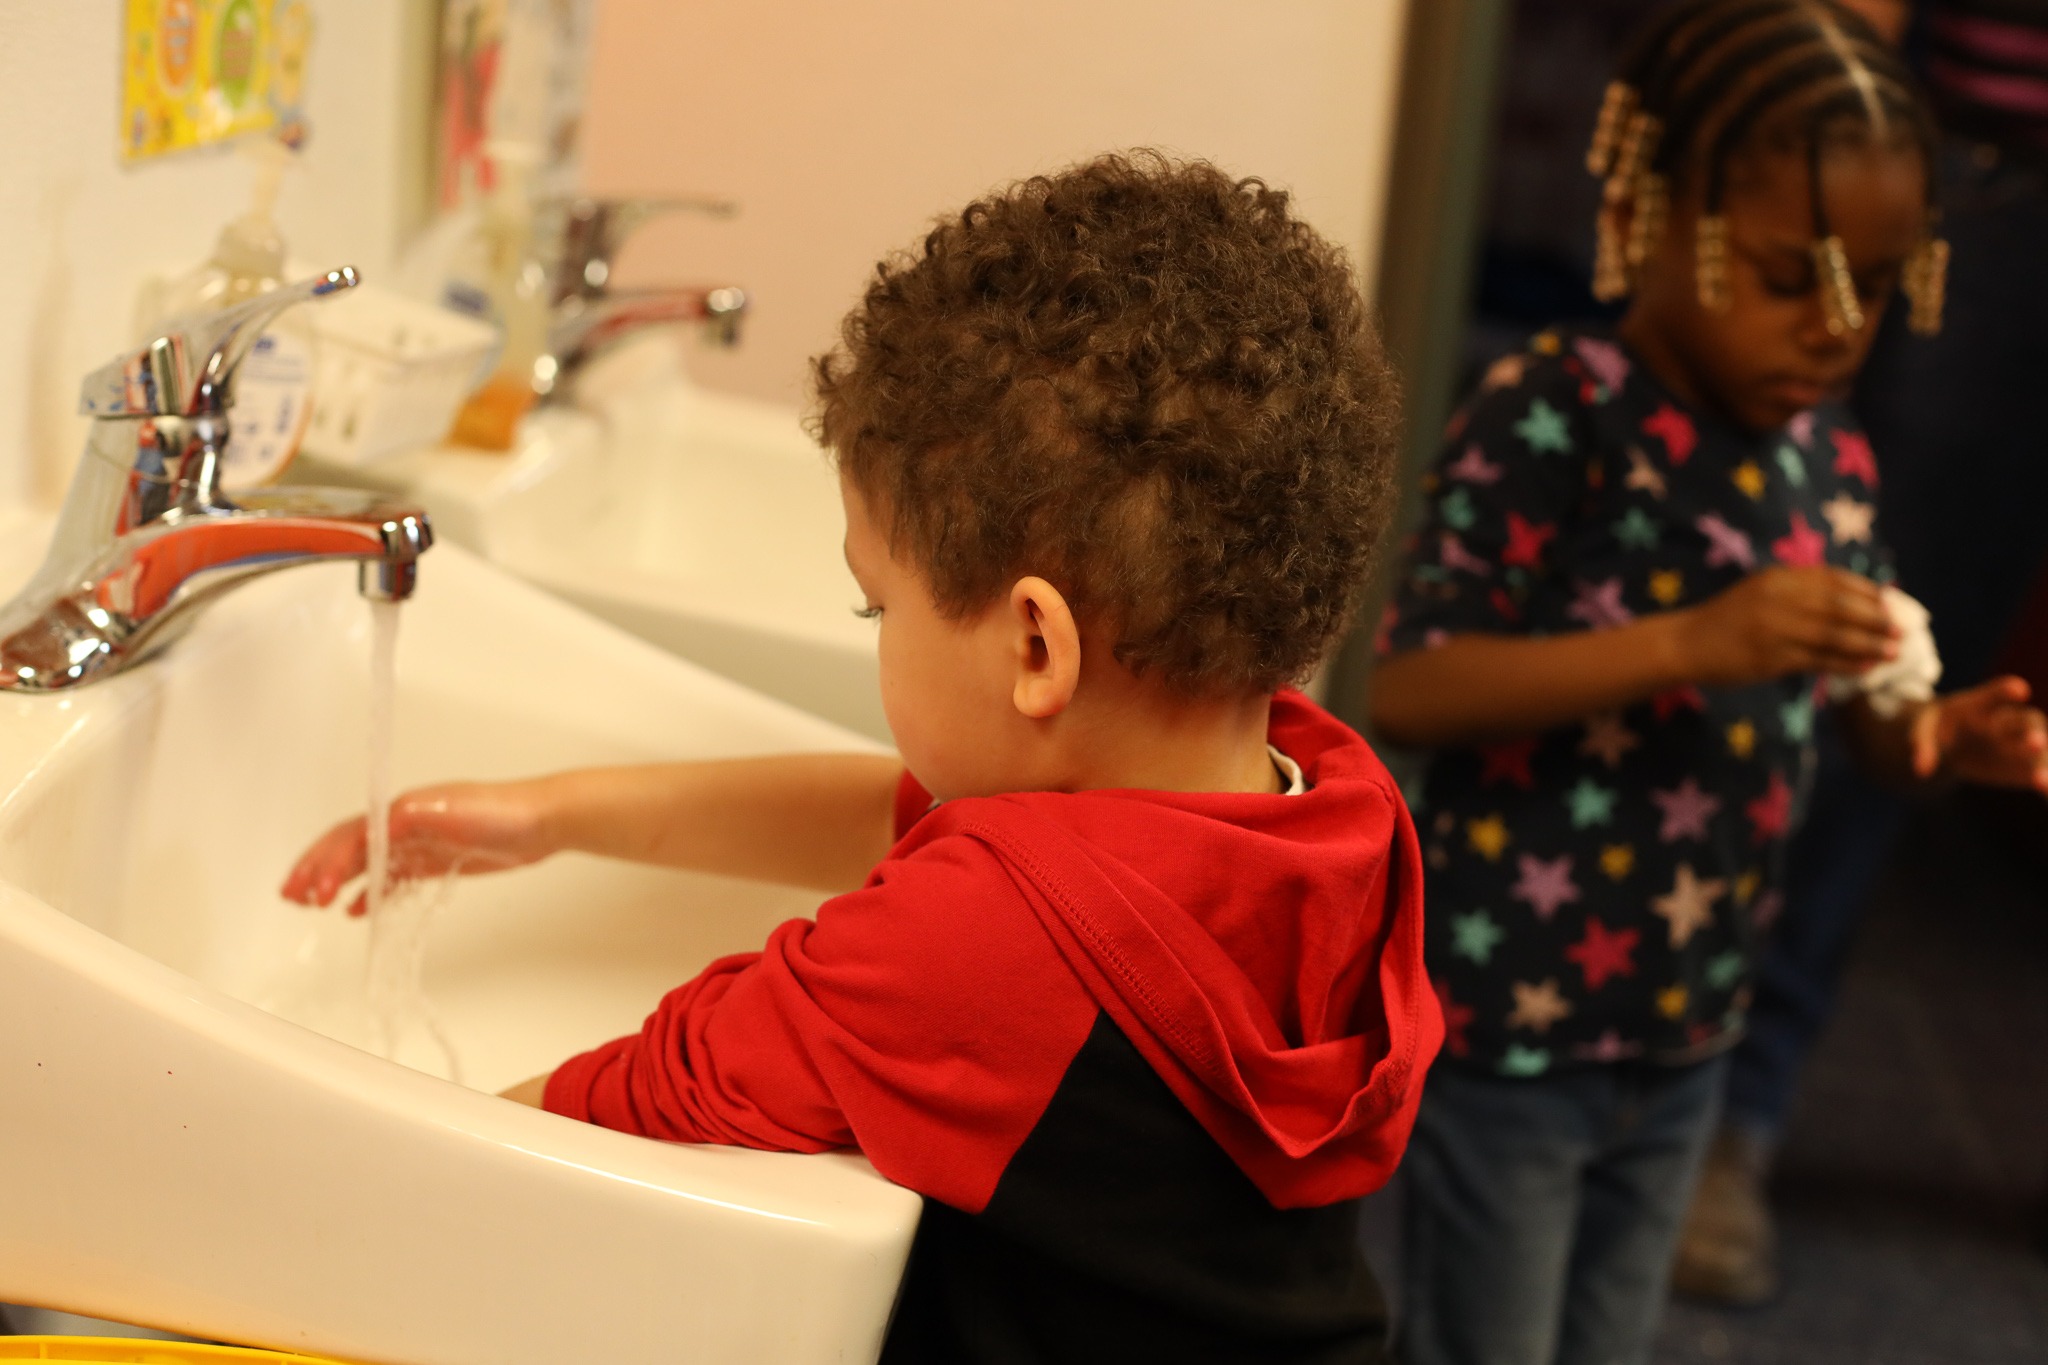 Child washing hands in the sink